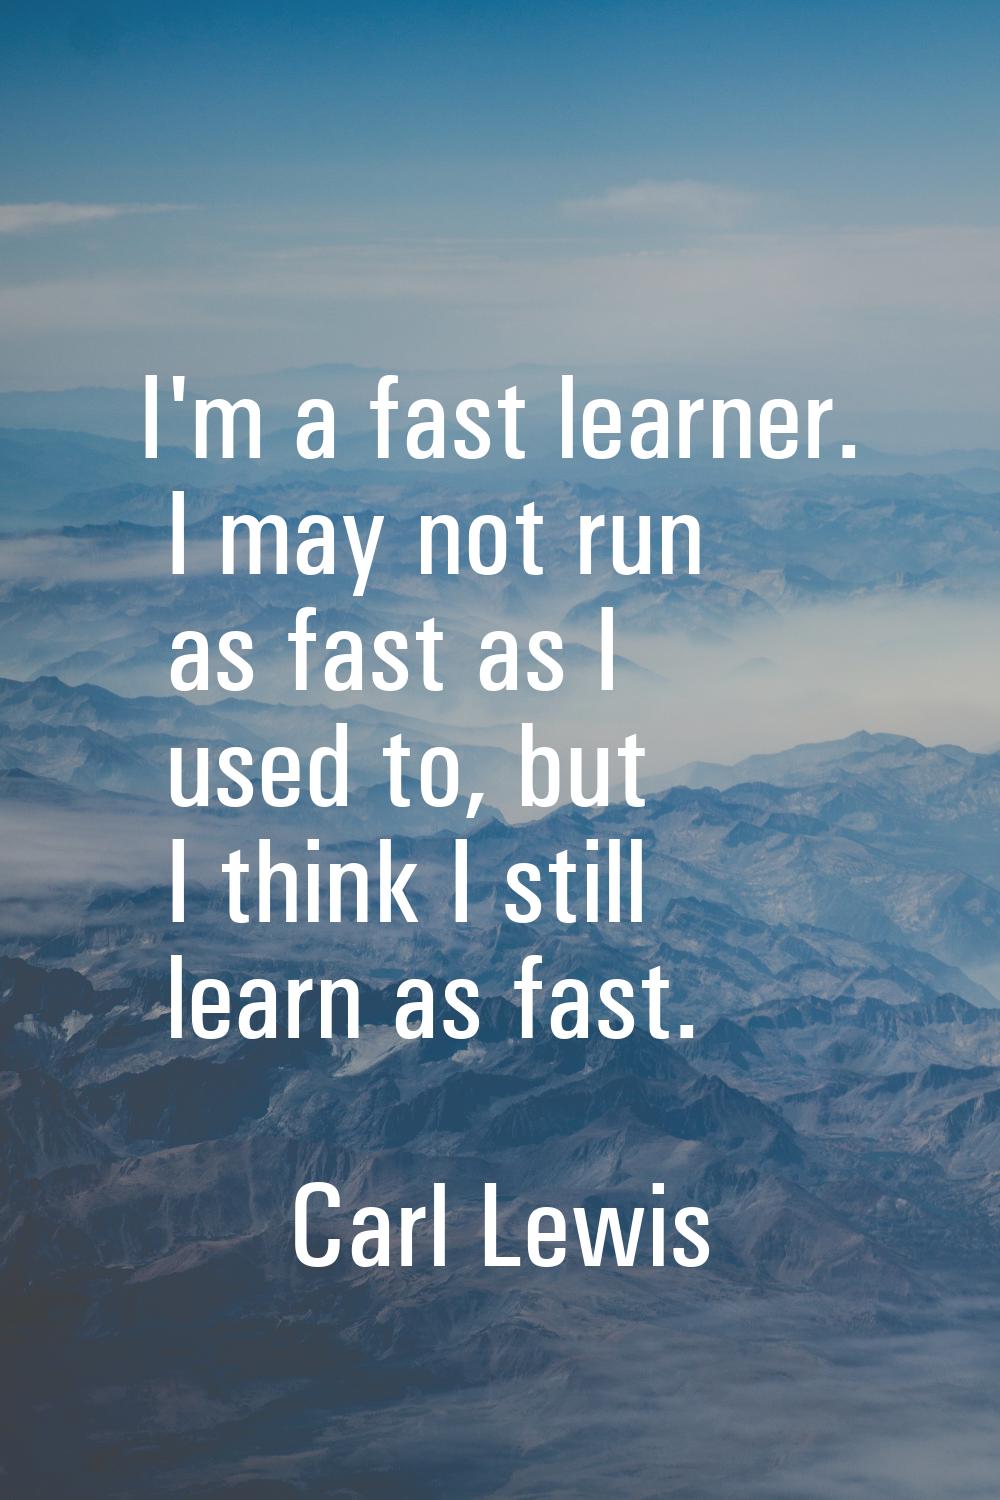 I'm a fast learner. I may not run as fast as I used to, but I think I still learn as fast.